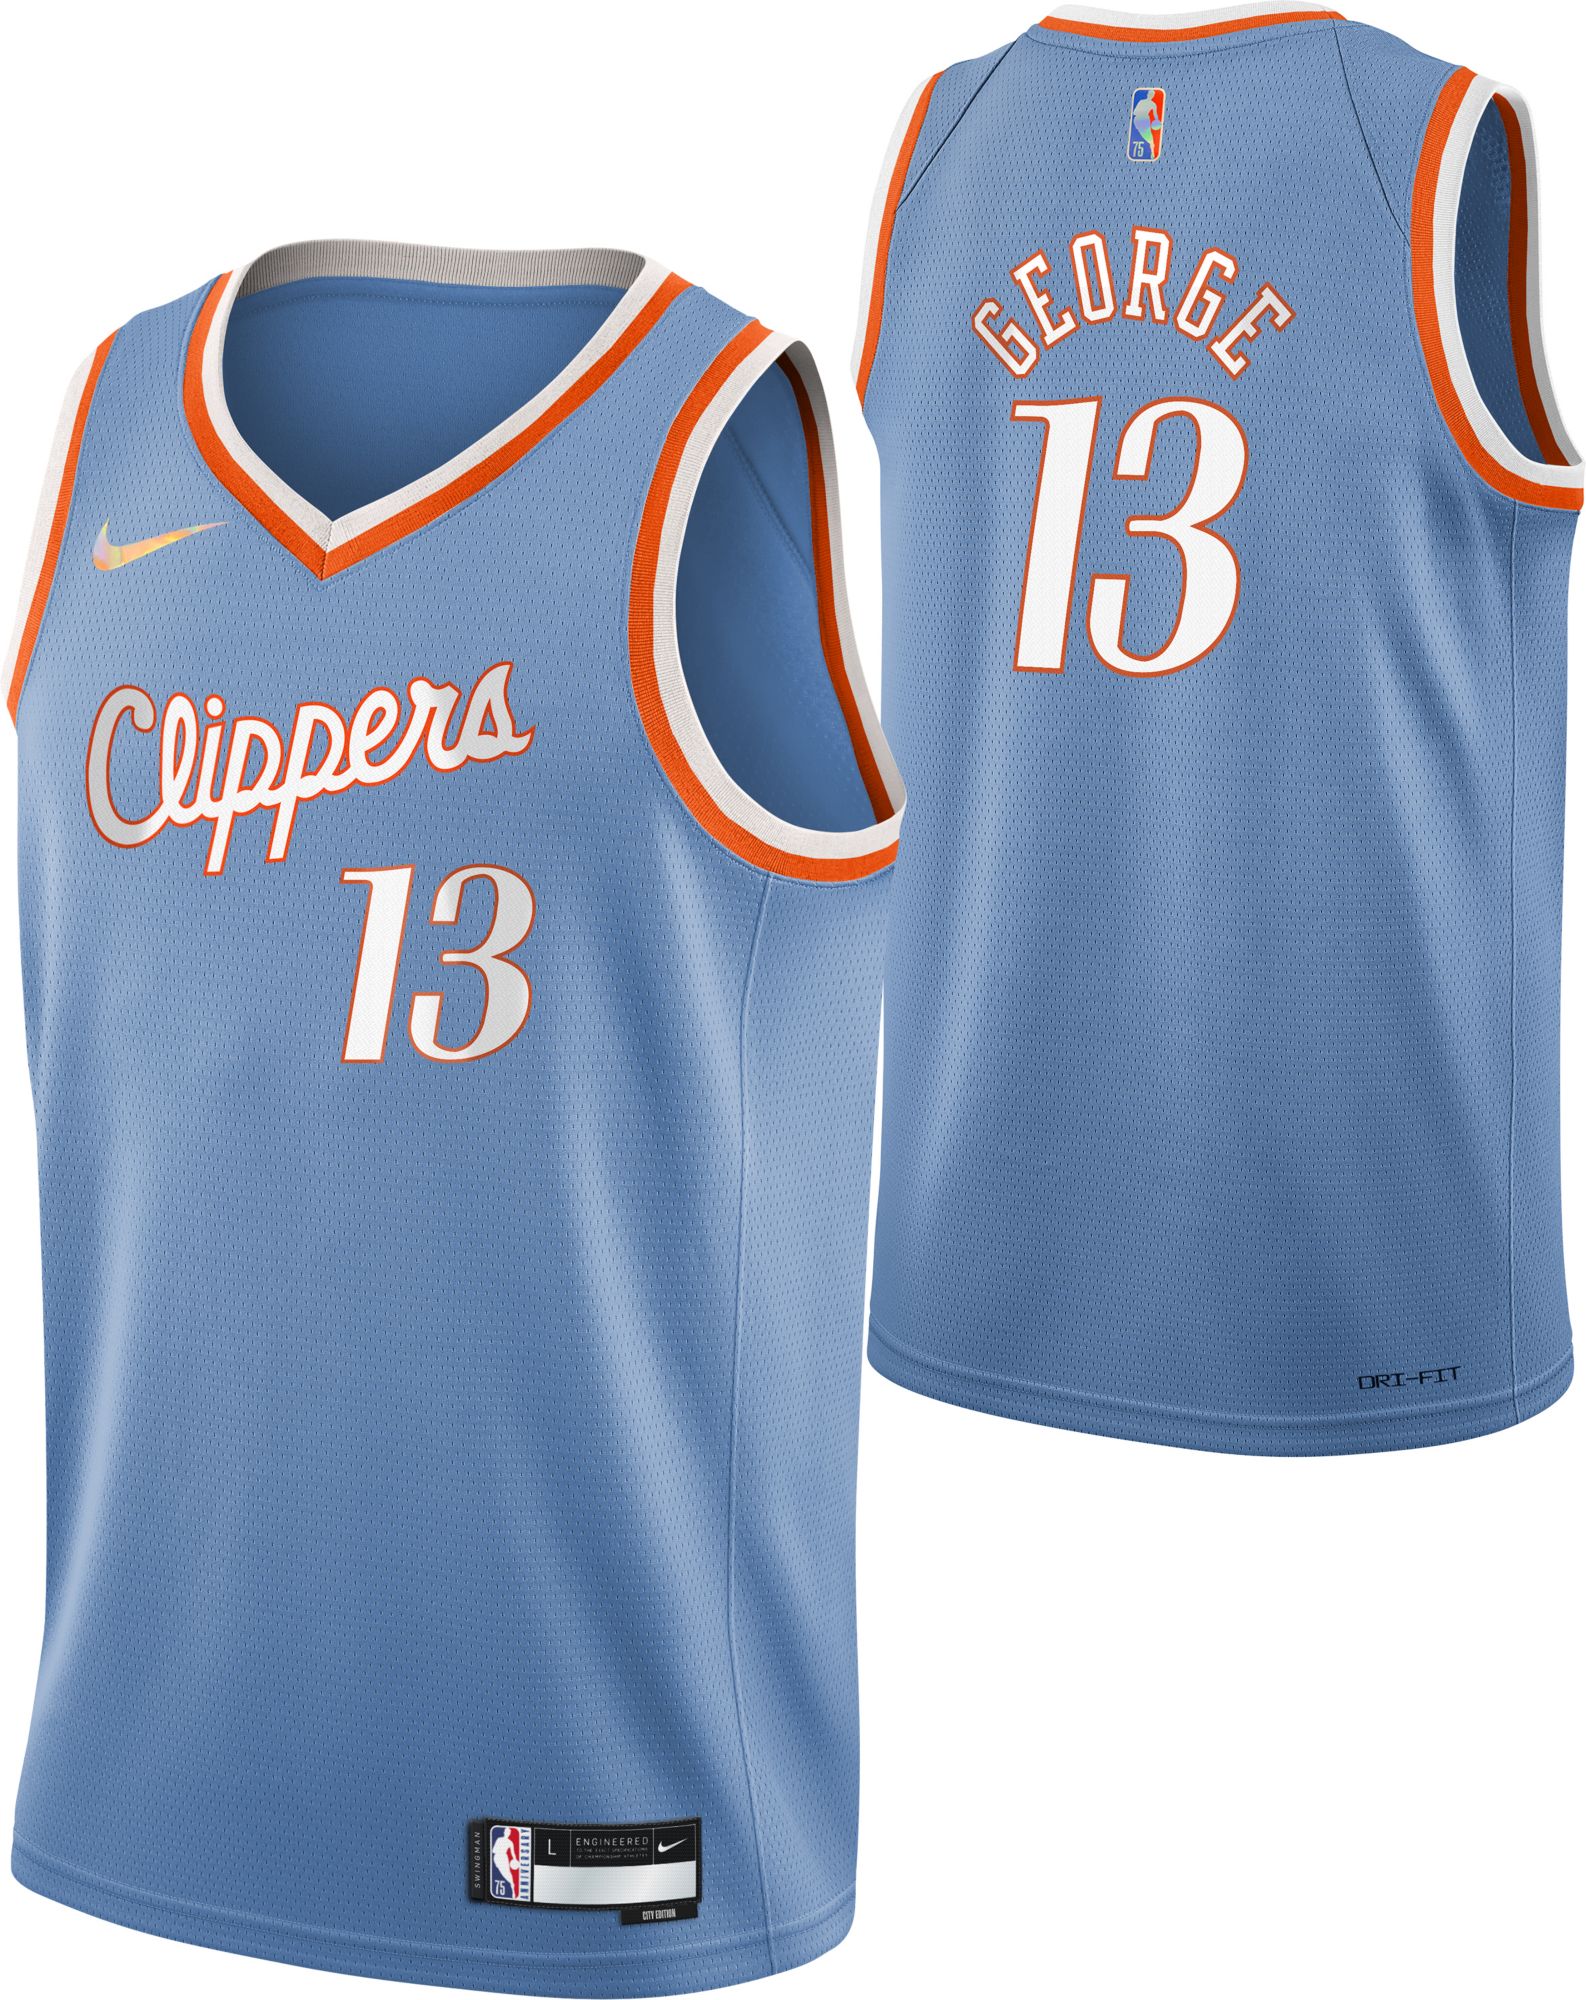 los angeles clippers uniforms